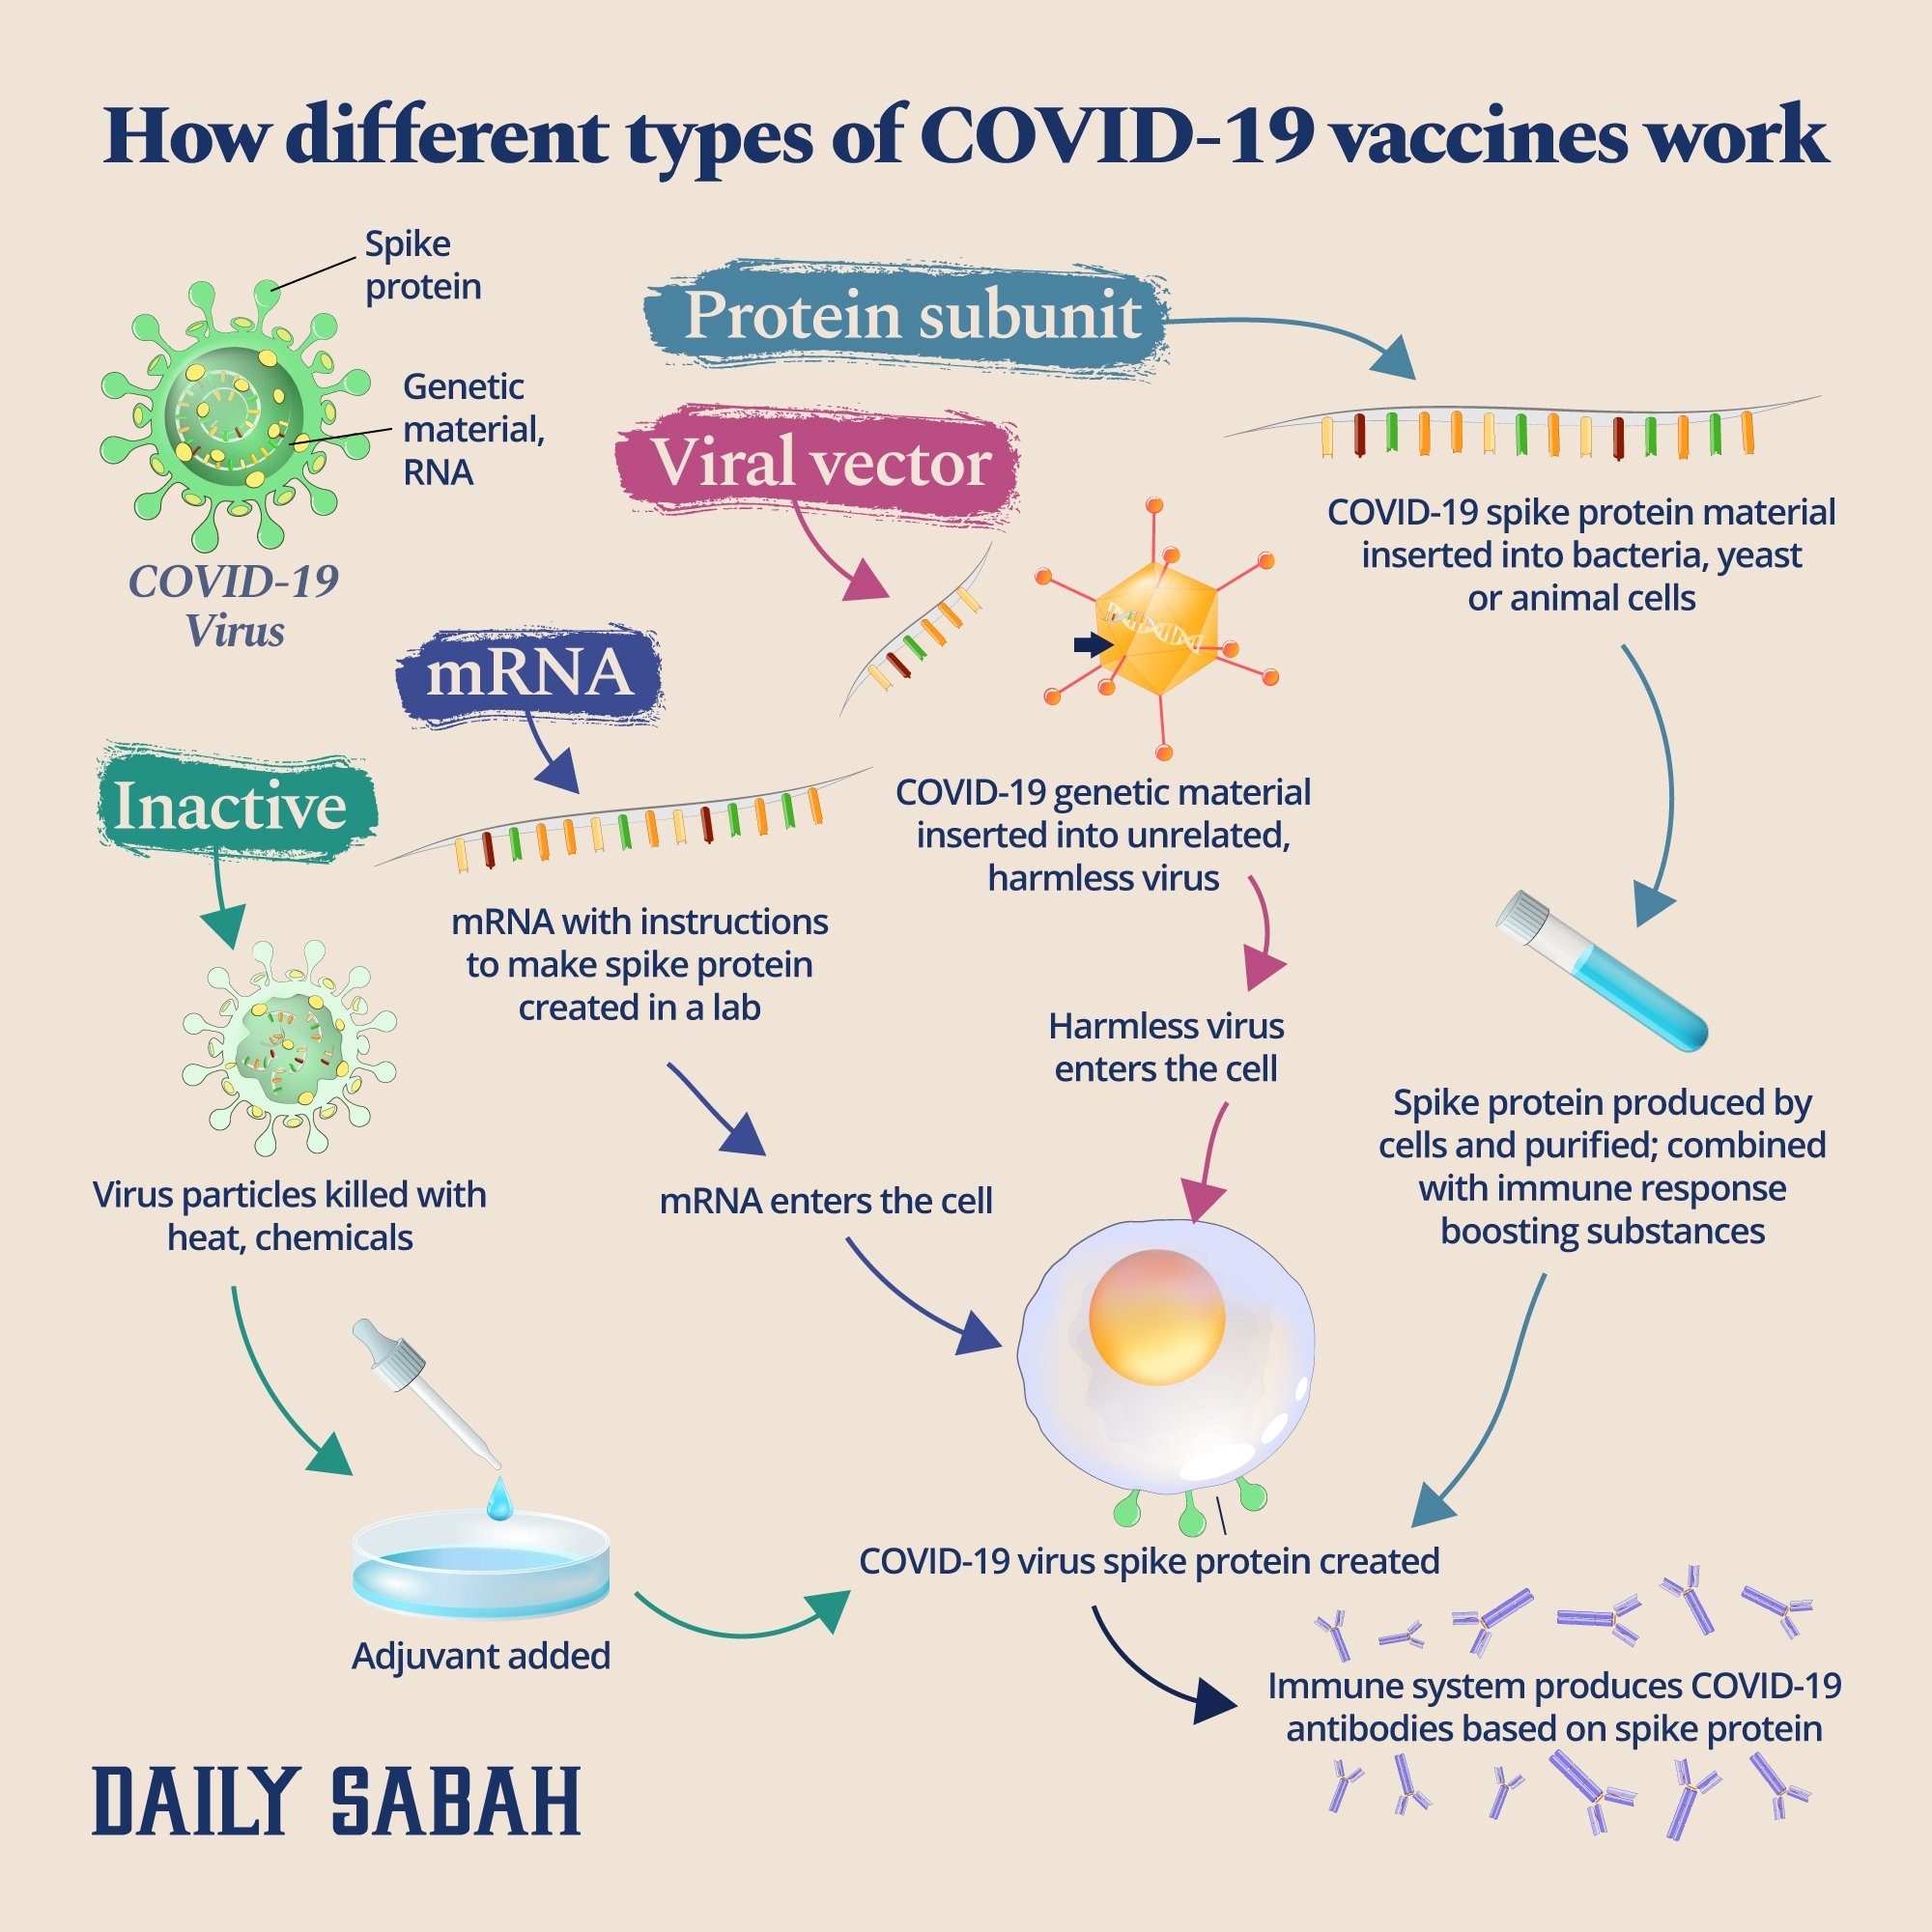 Infographic shows how the mRNA, inactivated, protein subunit and vector COVID-19 vaccines work. (Daily Sabah) 